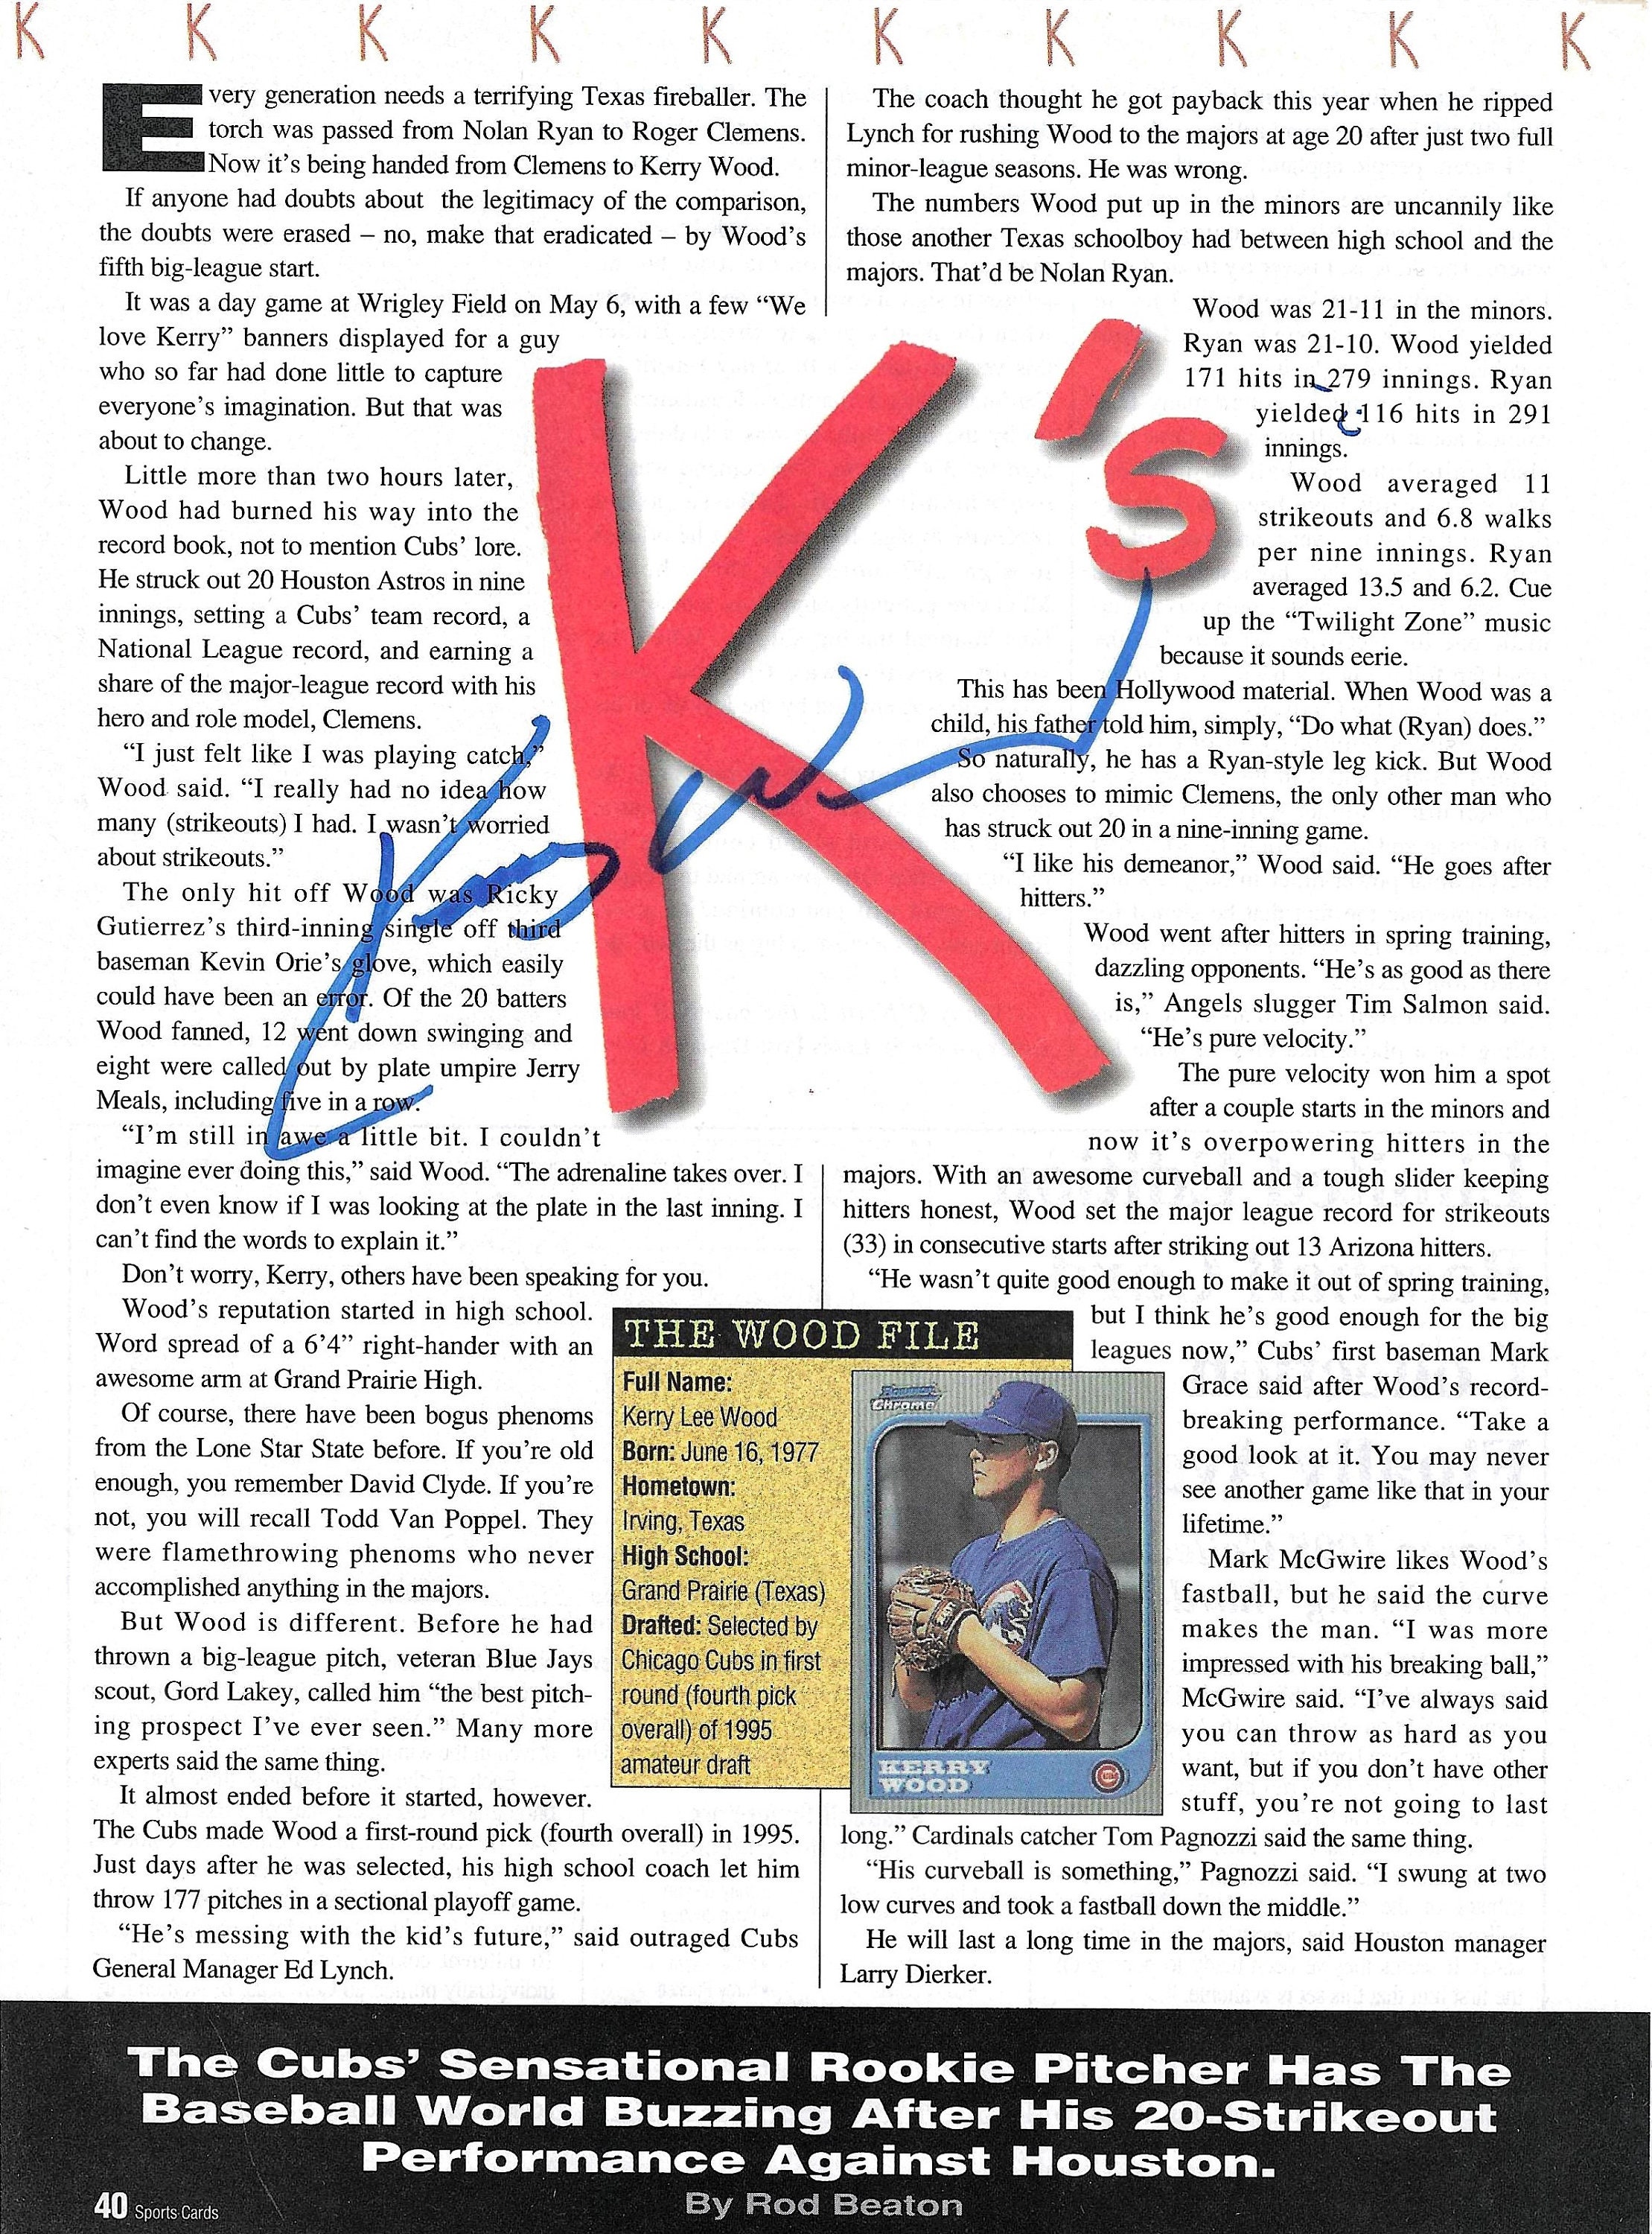 Kerry Wood Signed 8x10 Magazine Article -  Sweden